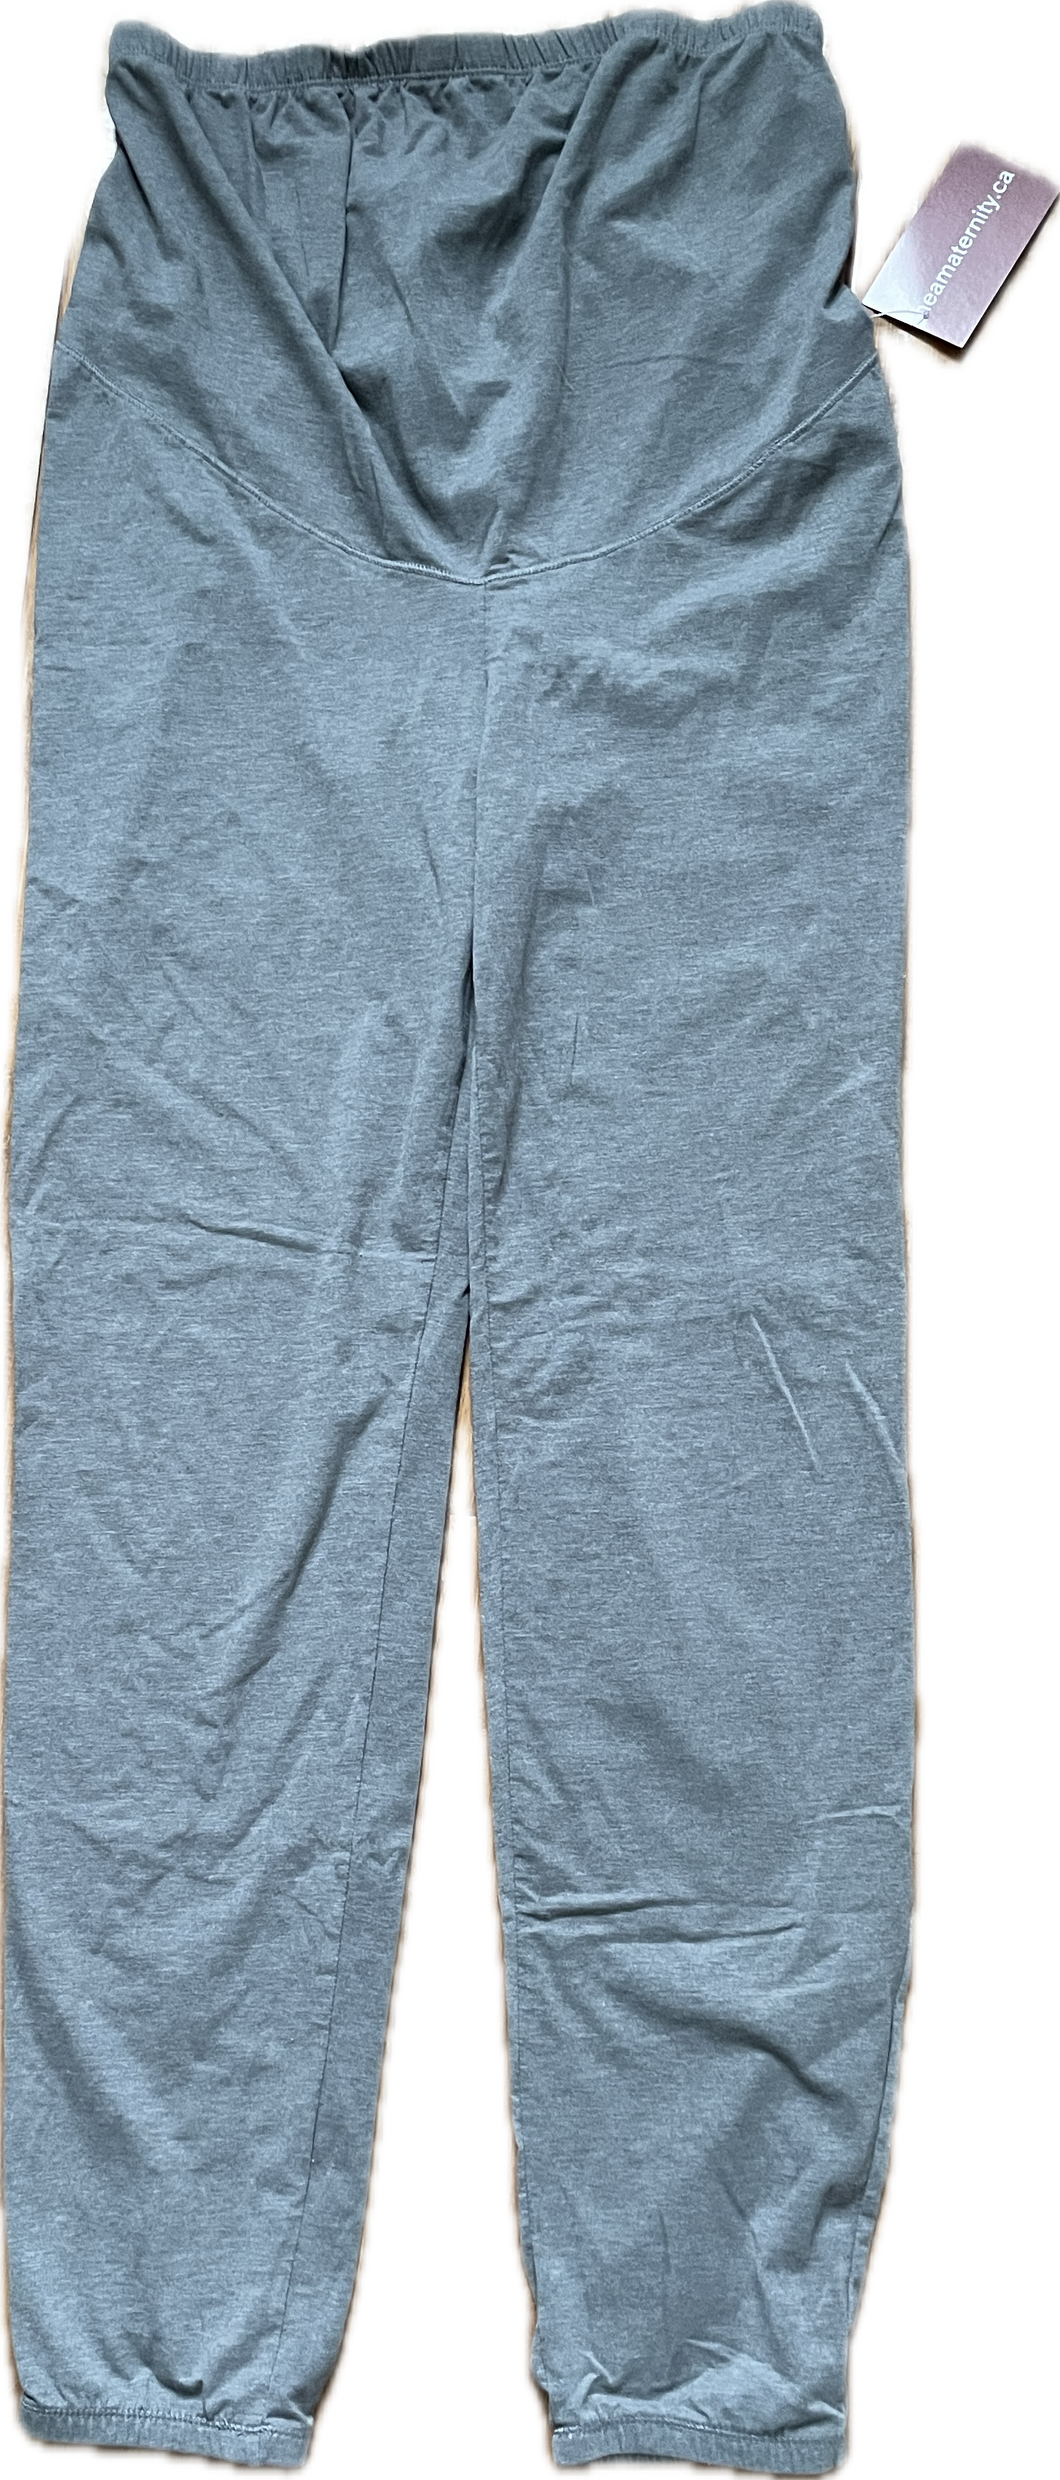 S H&M Mama Maternity Grey Joggers Day or Night